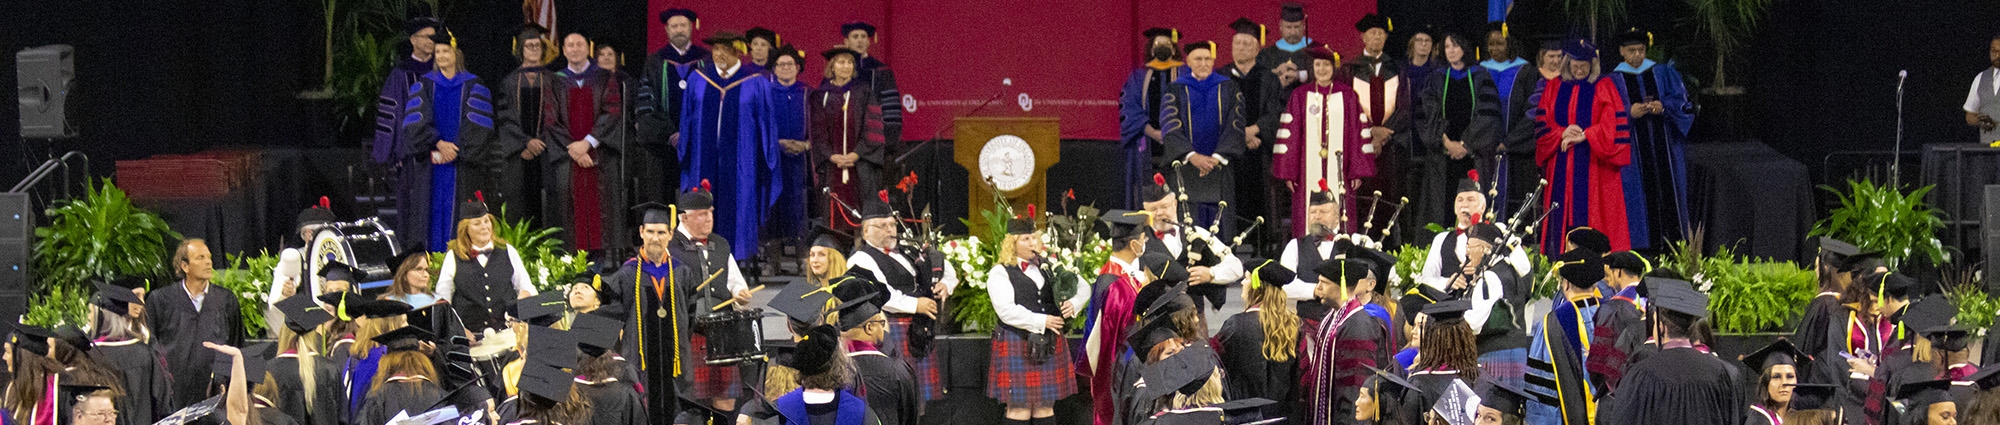 A busy stage is set with faculty in graduation attire of various colors while a Scottish pipe band plays in the foreground. Several students can be seen in black cap and gown